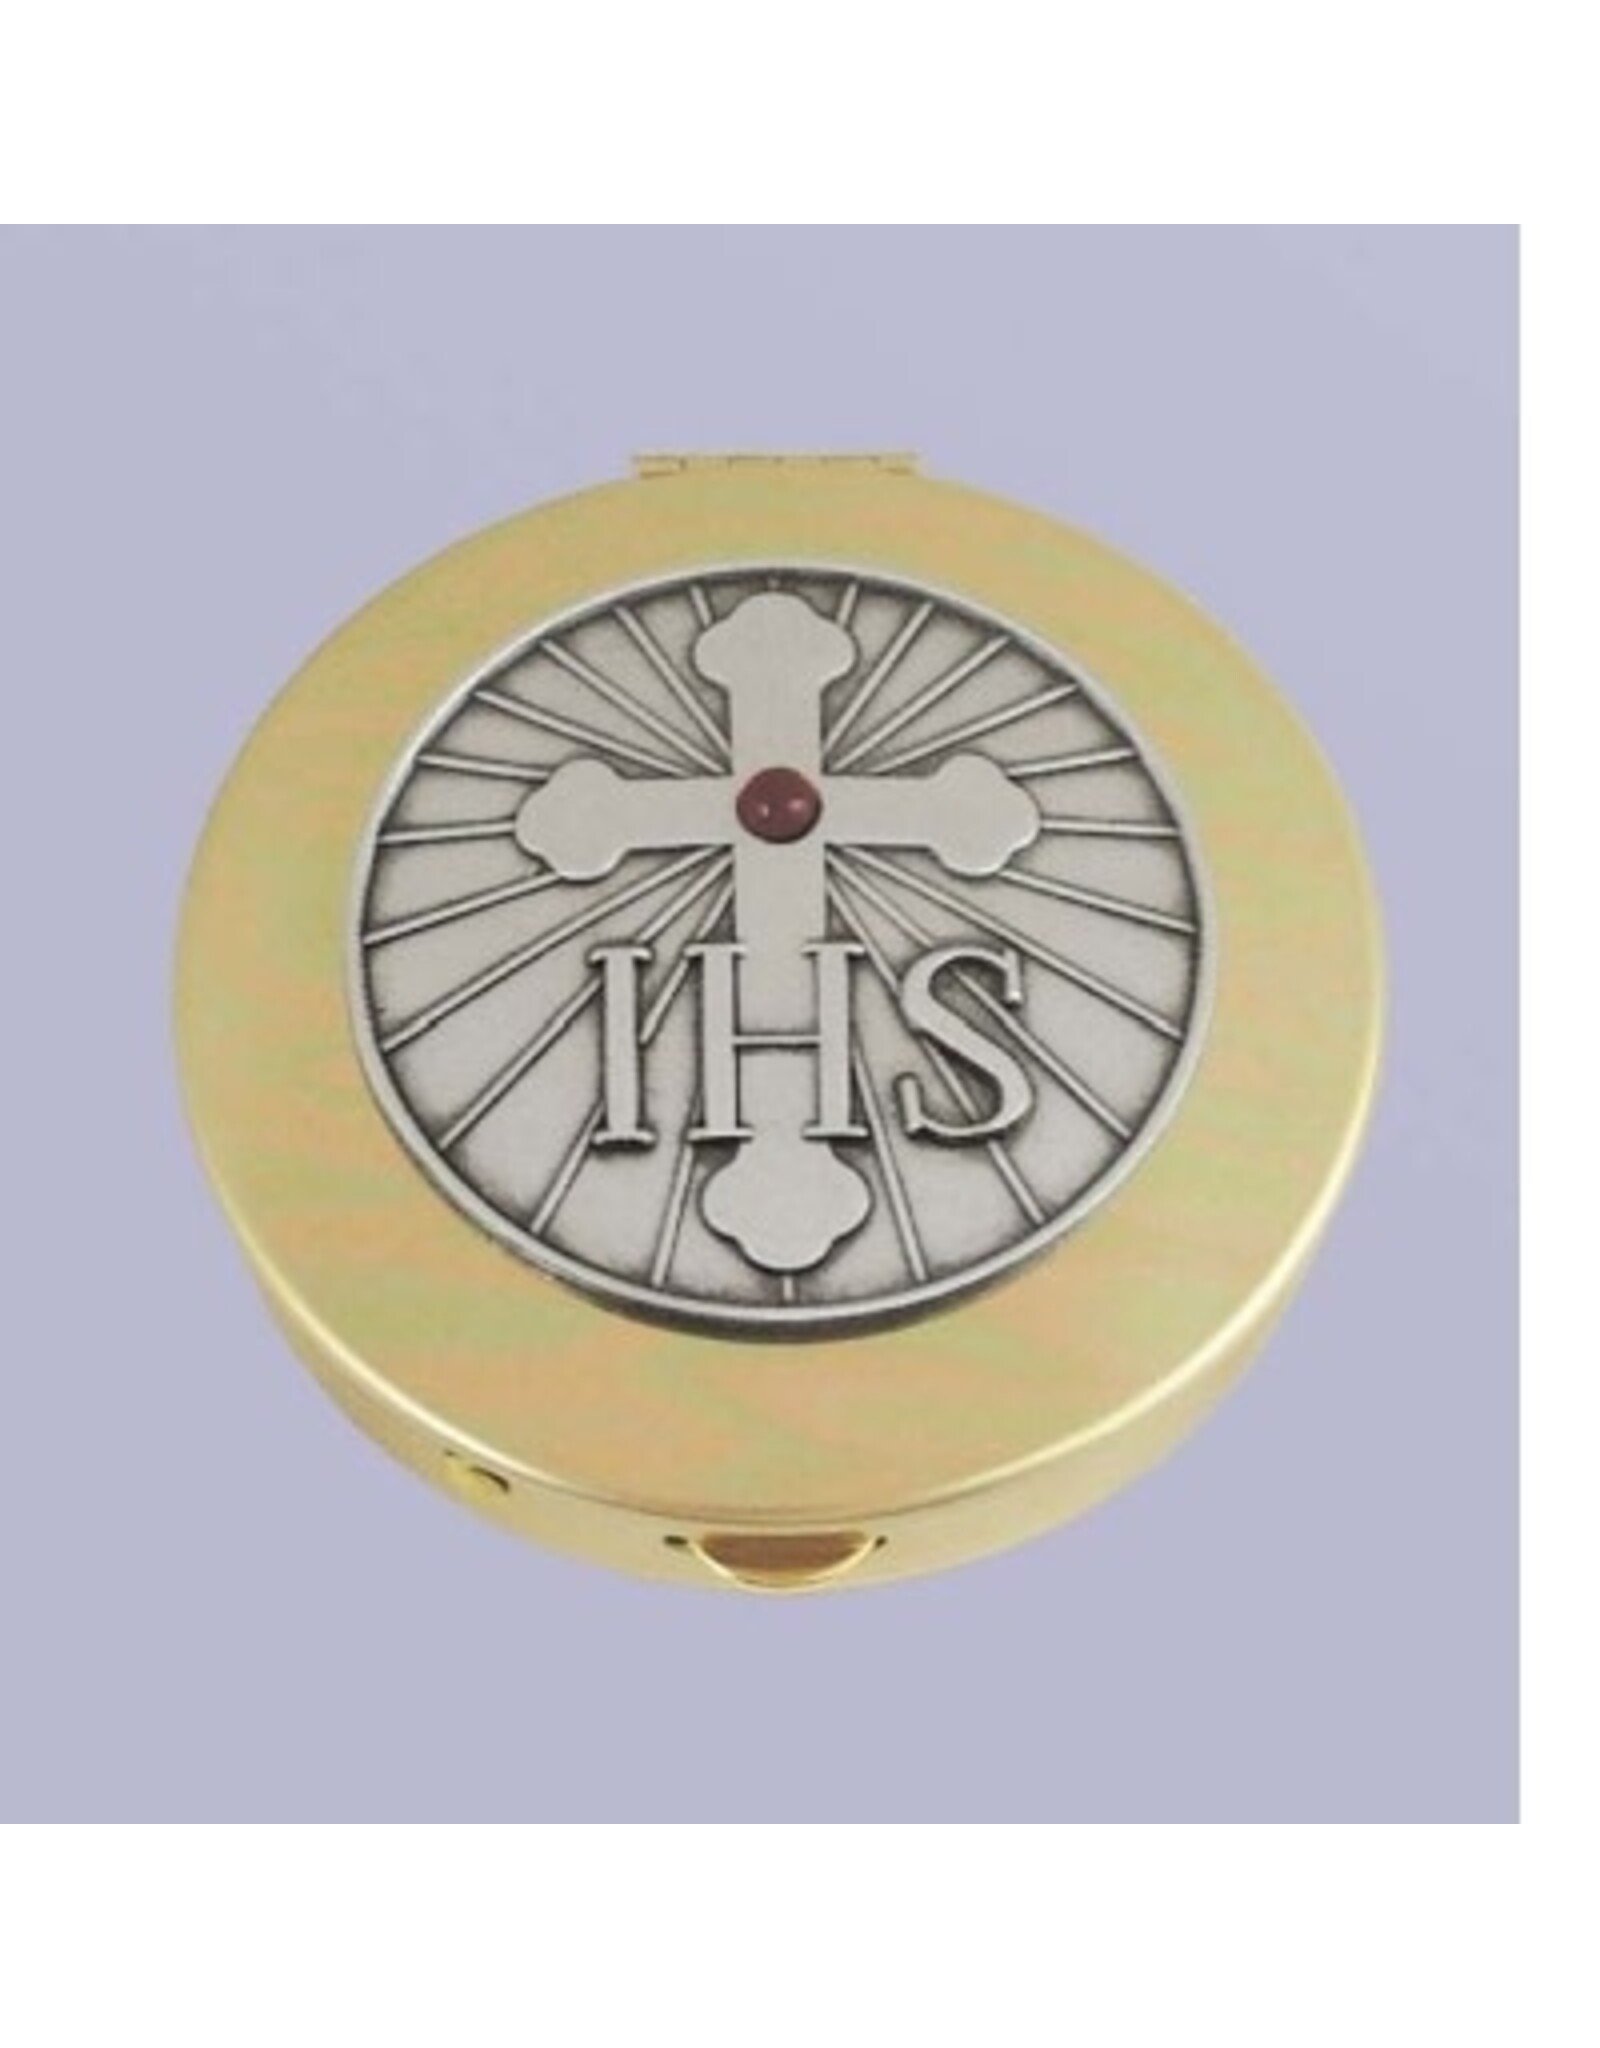 Abbey & CA Gift Pyx - IHS with Red Jewel - Available in 2 Sizes